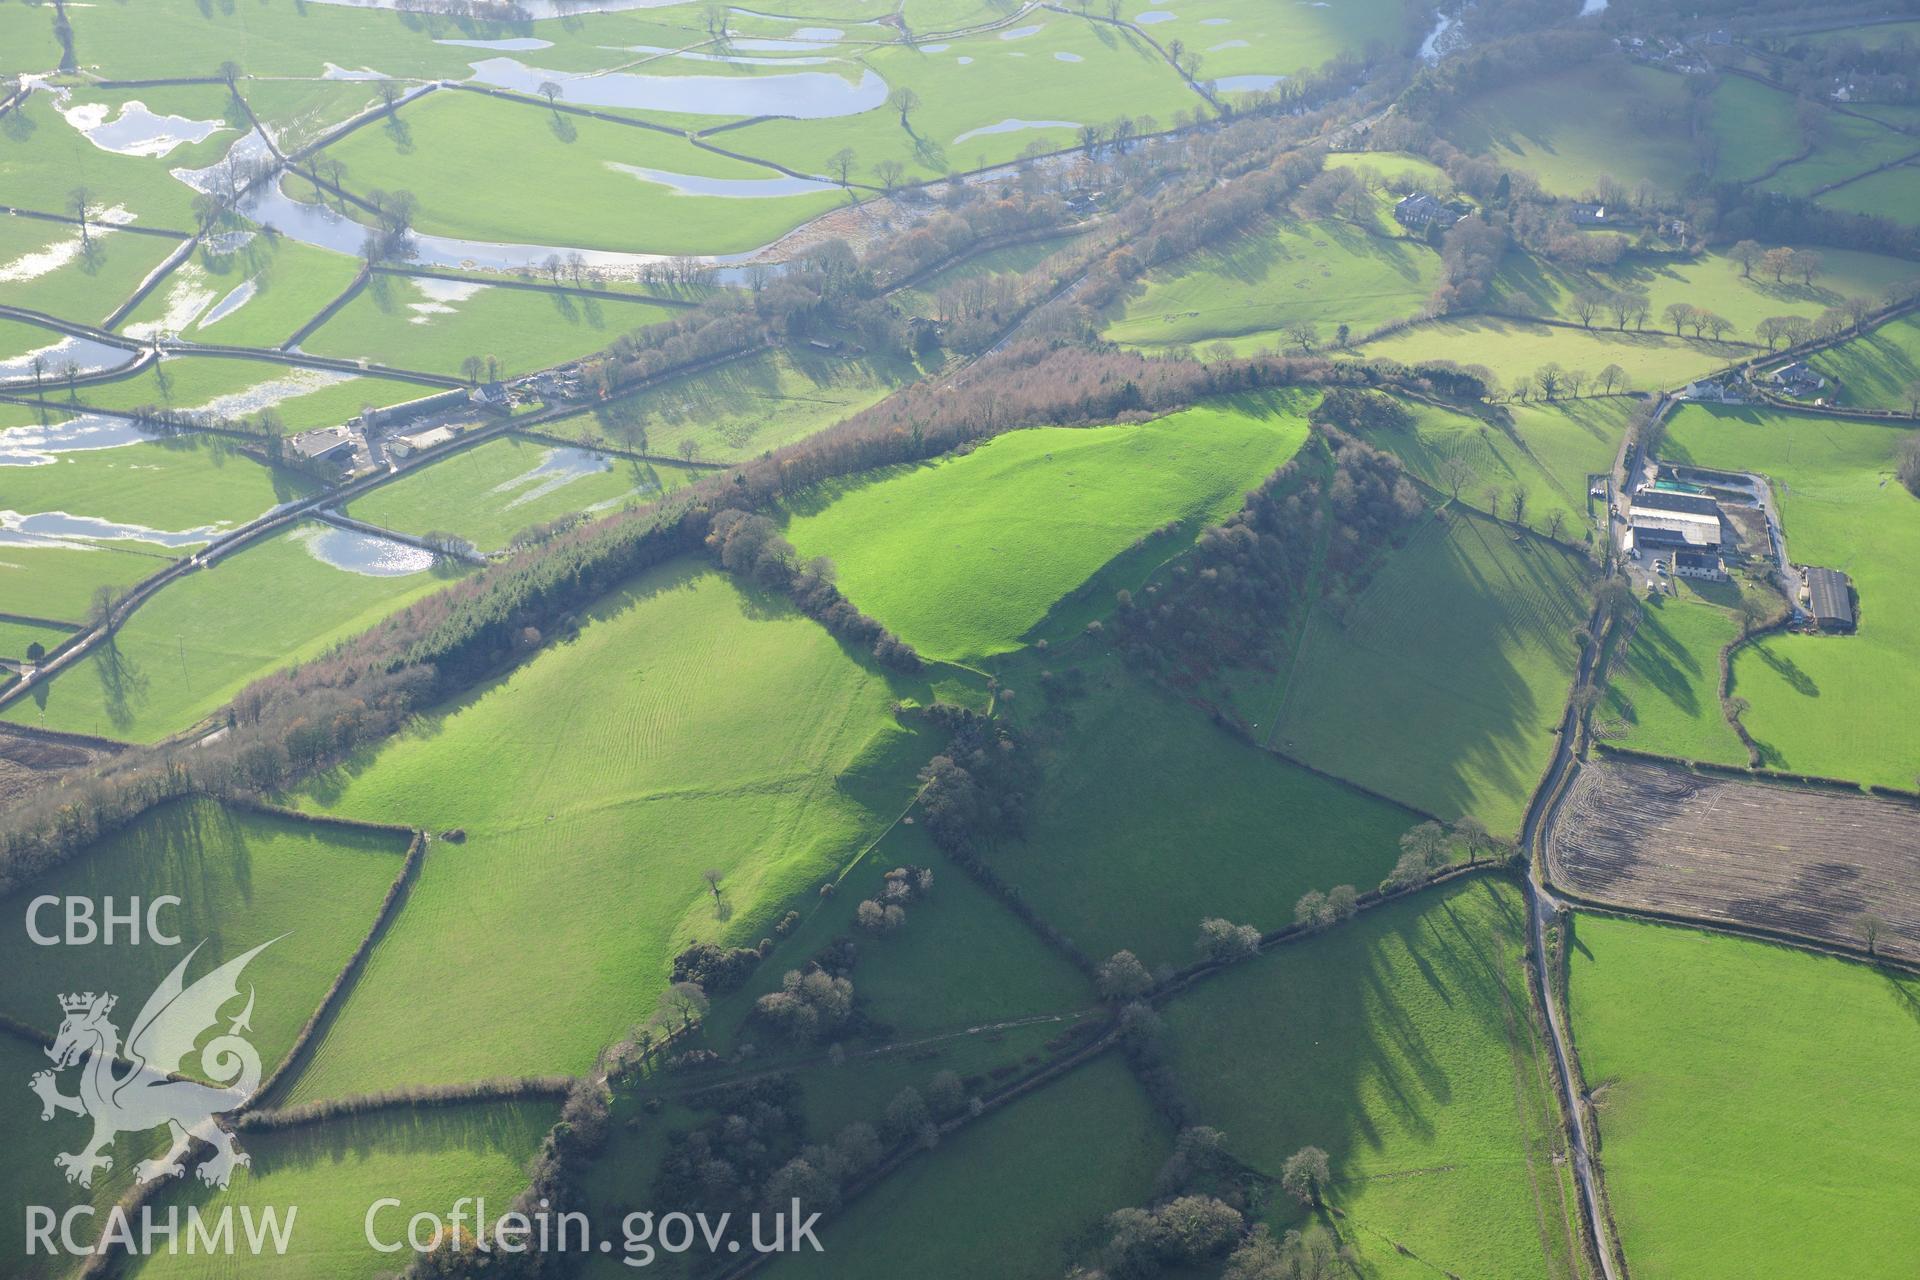 RCAHMW colour oblique photograph of Merlins Hill hillfort. Taken by Toby Driver on 28/11/2012.